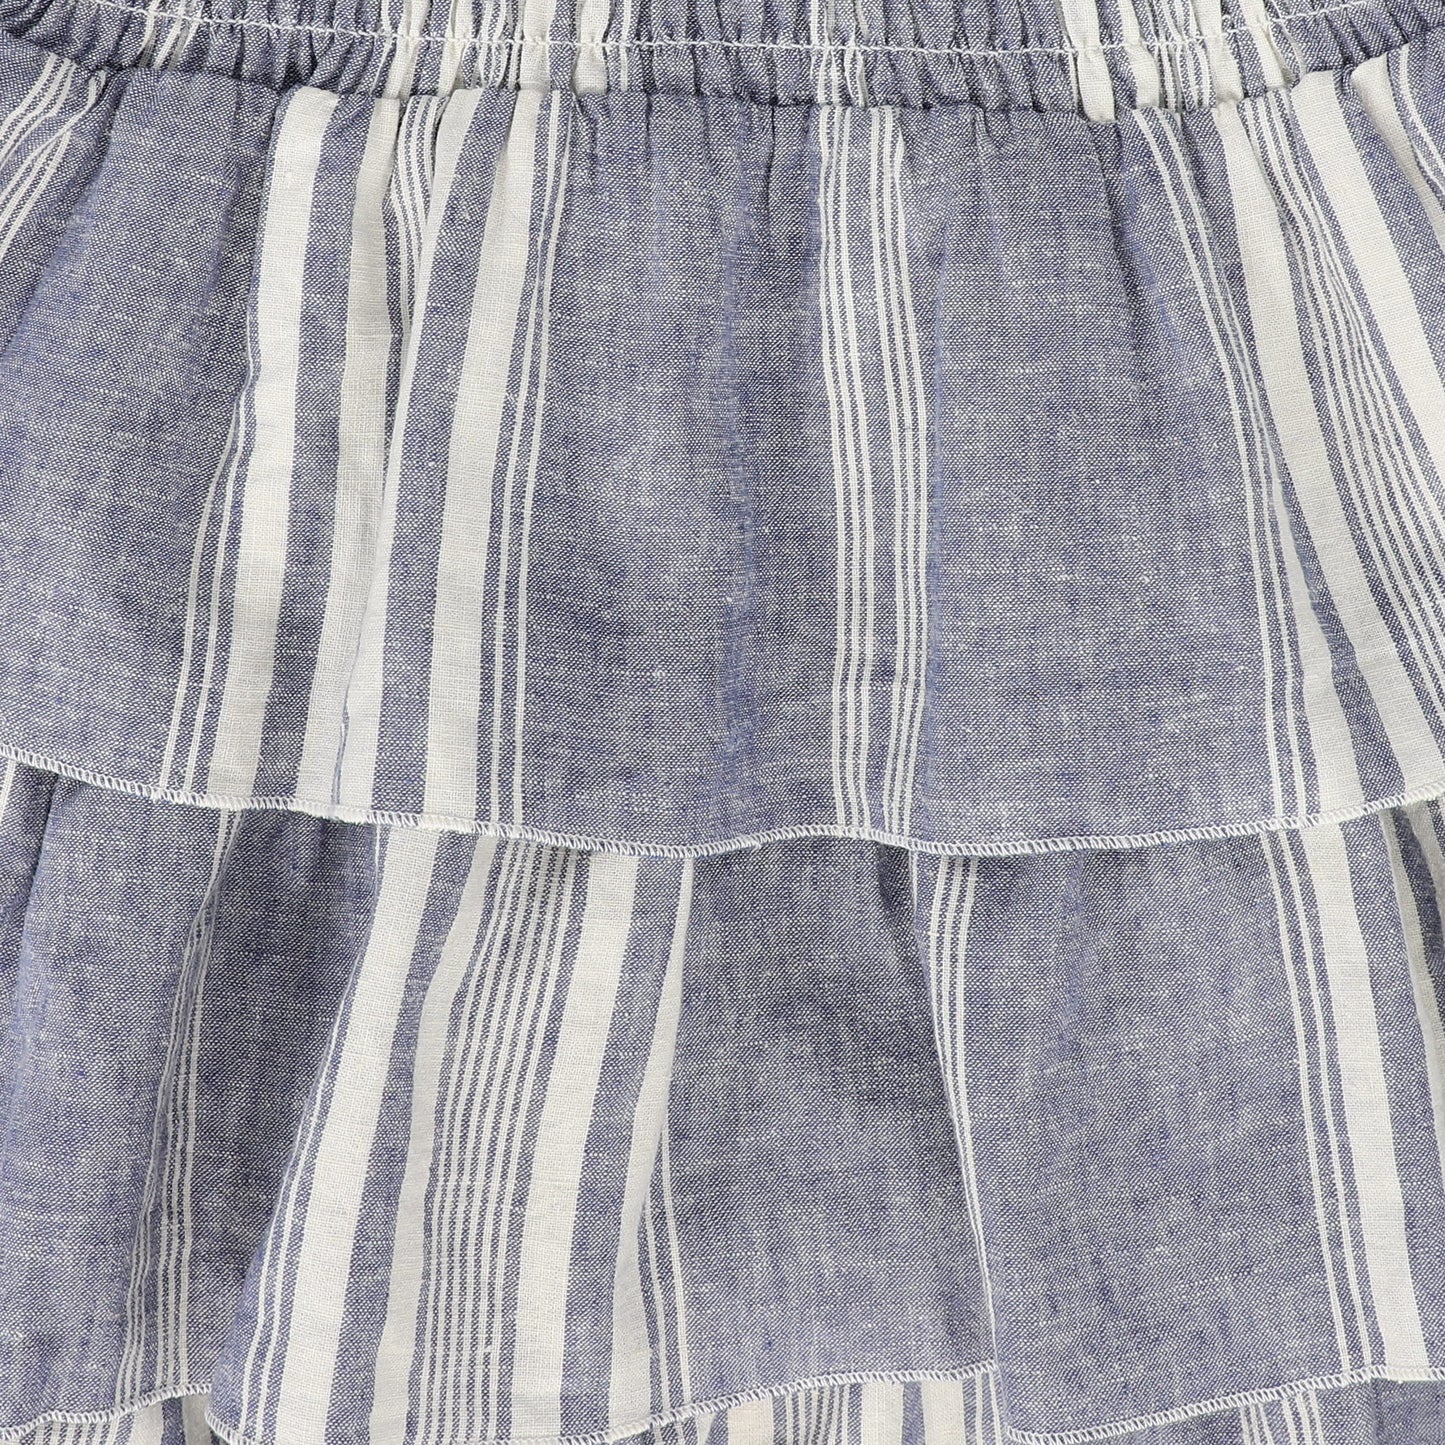 BACE COLLECTION BLUE STRIPED LAYERED SKIRT [FINAL SALE]